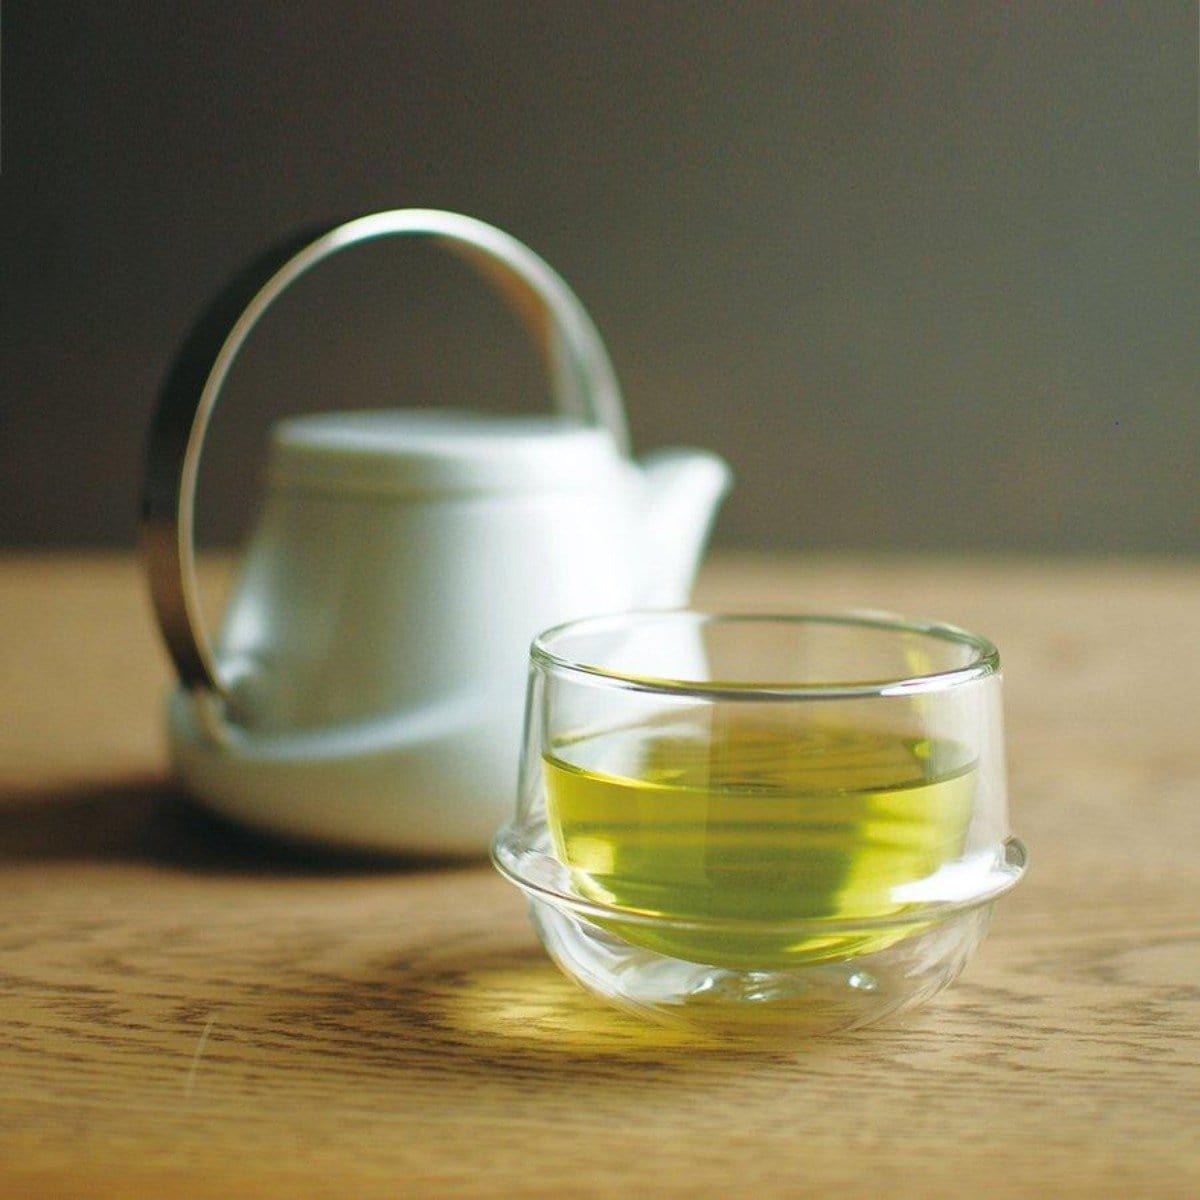 A Kinto Double-Walled Teacup filled with light green loose leaf tea is placed on a wooden surface. In the background, there is a white teapot with a silver handle, slightly out of focus. The setting appears calm and inviting, suggesting a moment of relaxation during the magic hour.